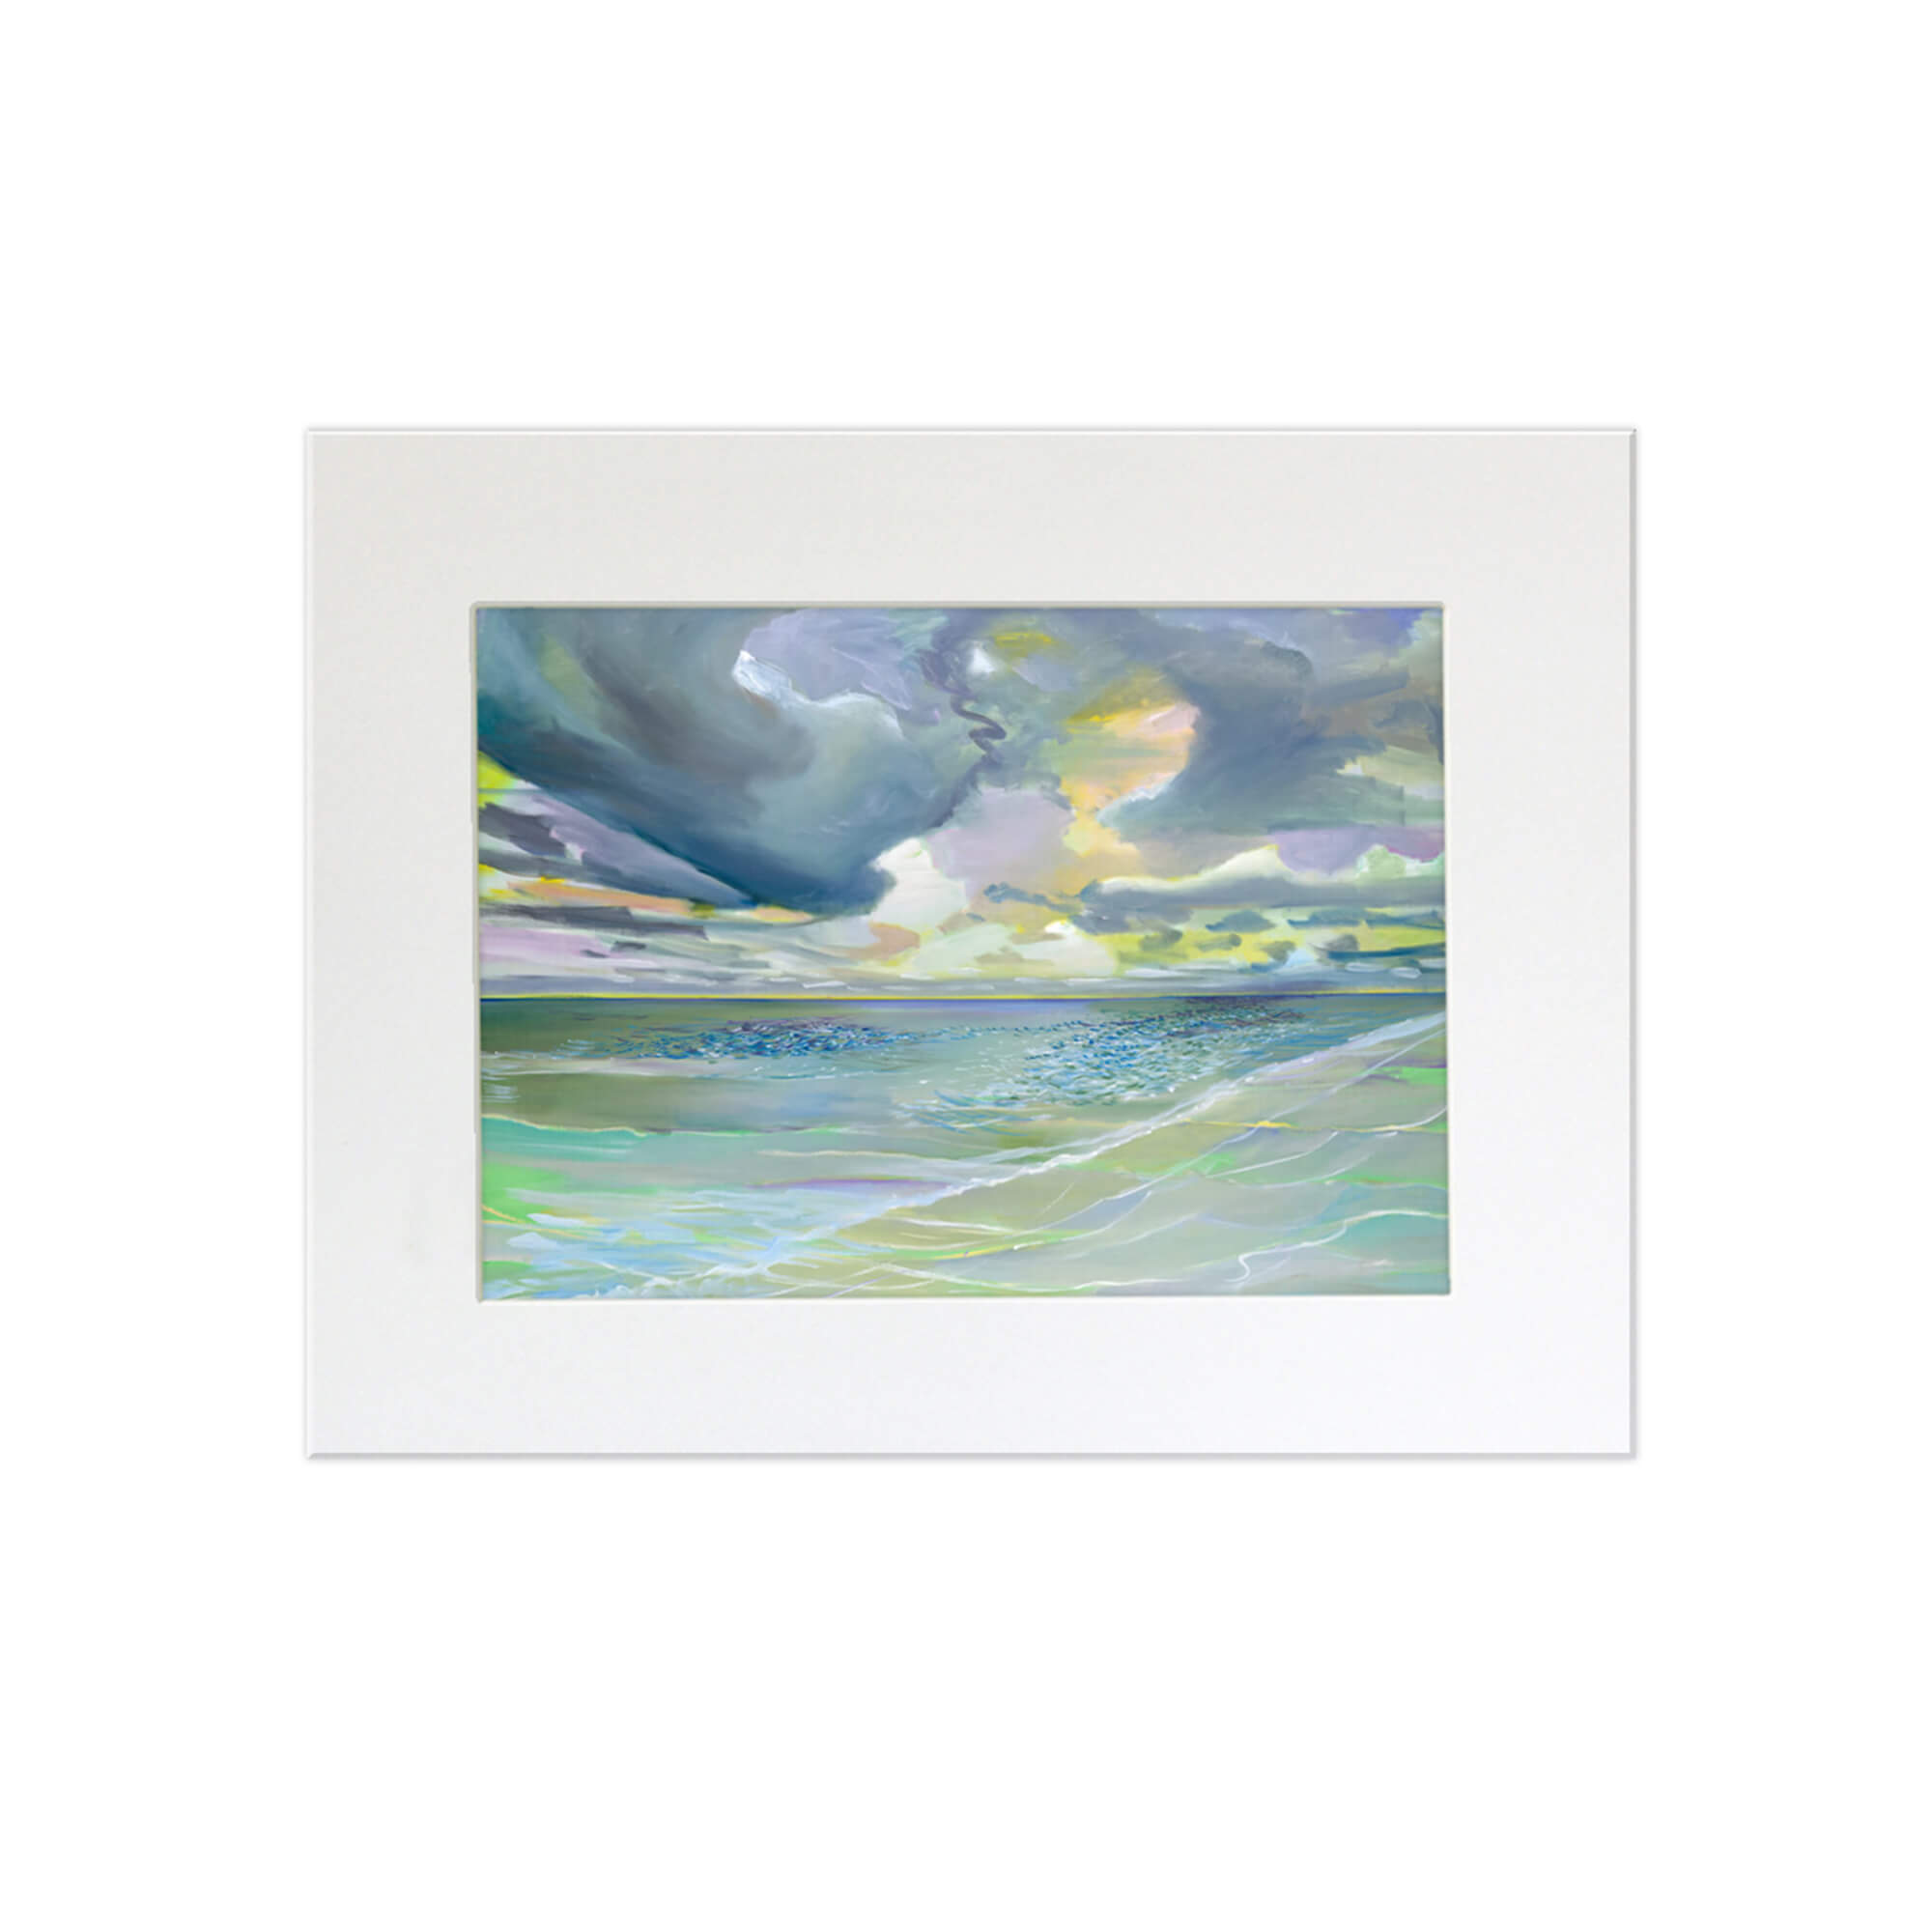  A matted art print of a serene seascape with the water reflecting yellow, green, blue, and teal hues by Hawaii artist Saumolia Puapuaga